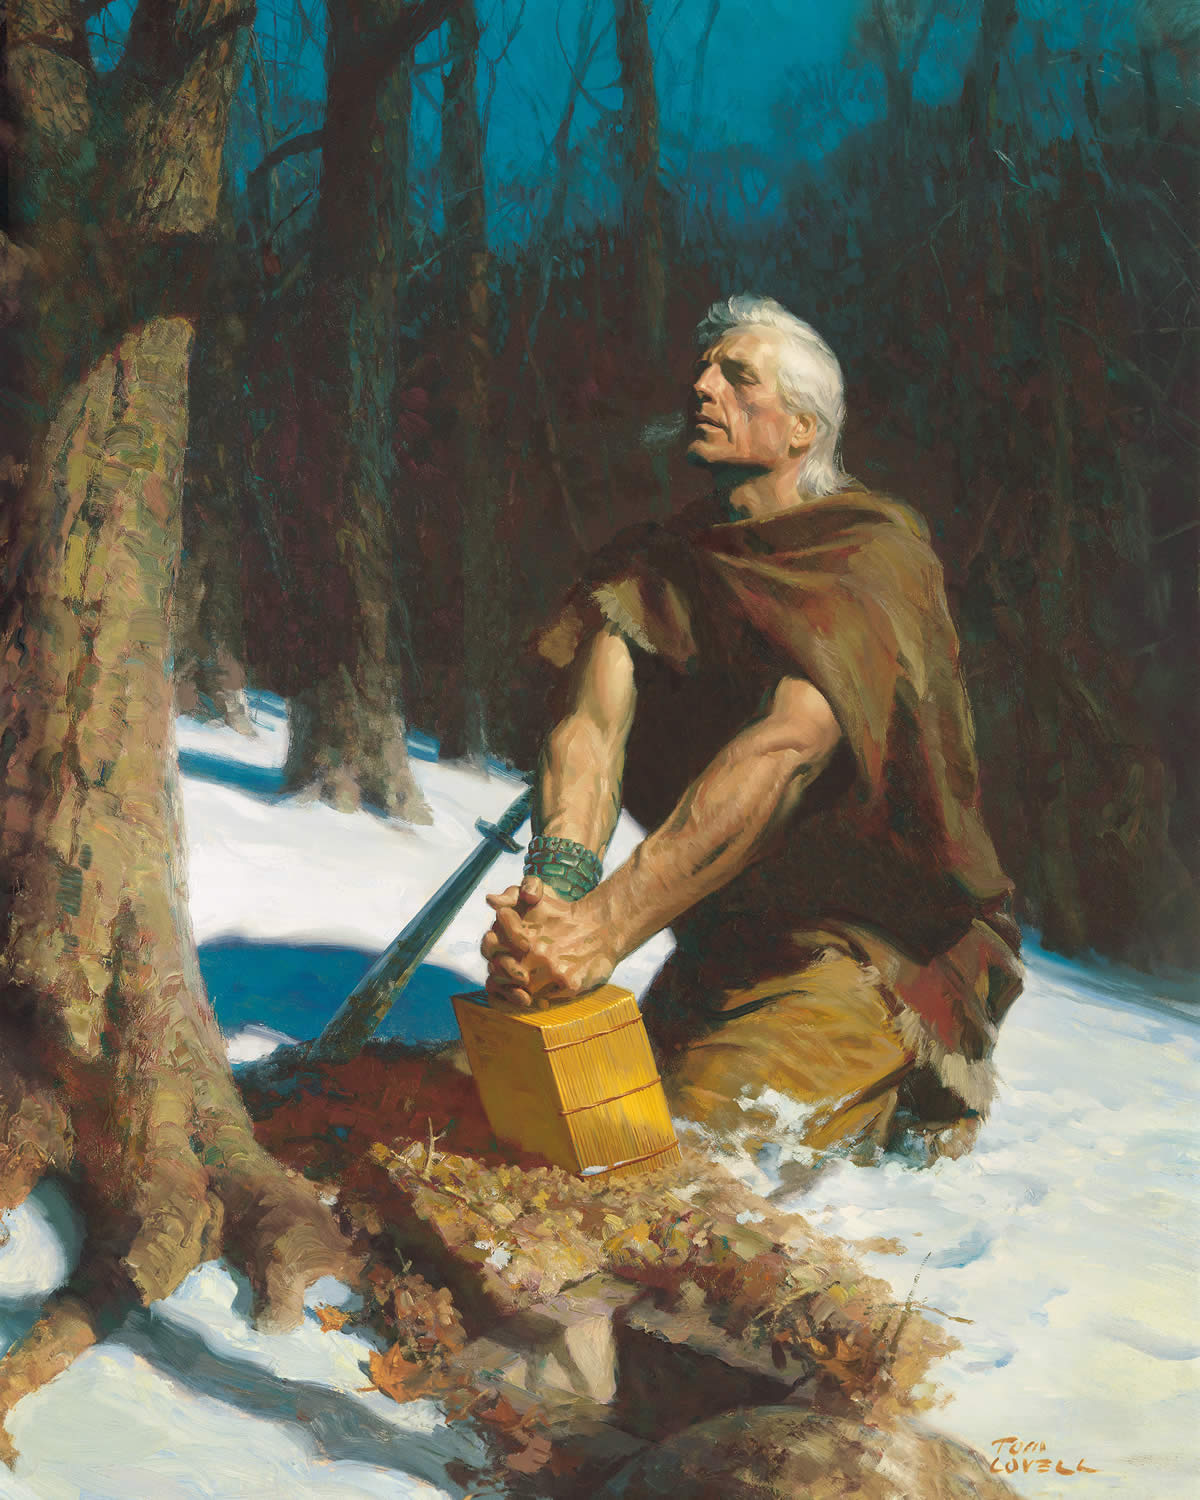 Prophet Moroni buries the sacred records of his people in the Hill Cumorah